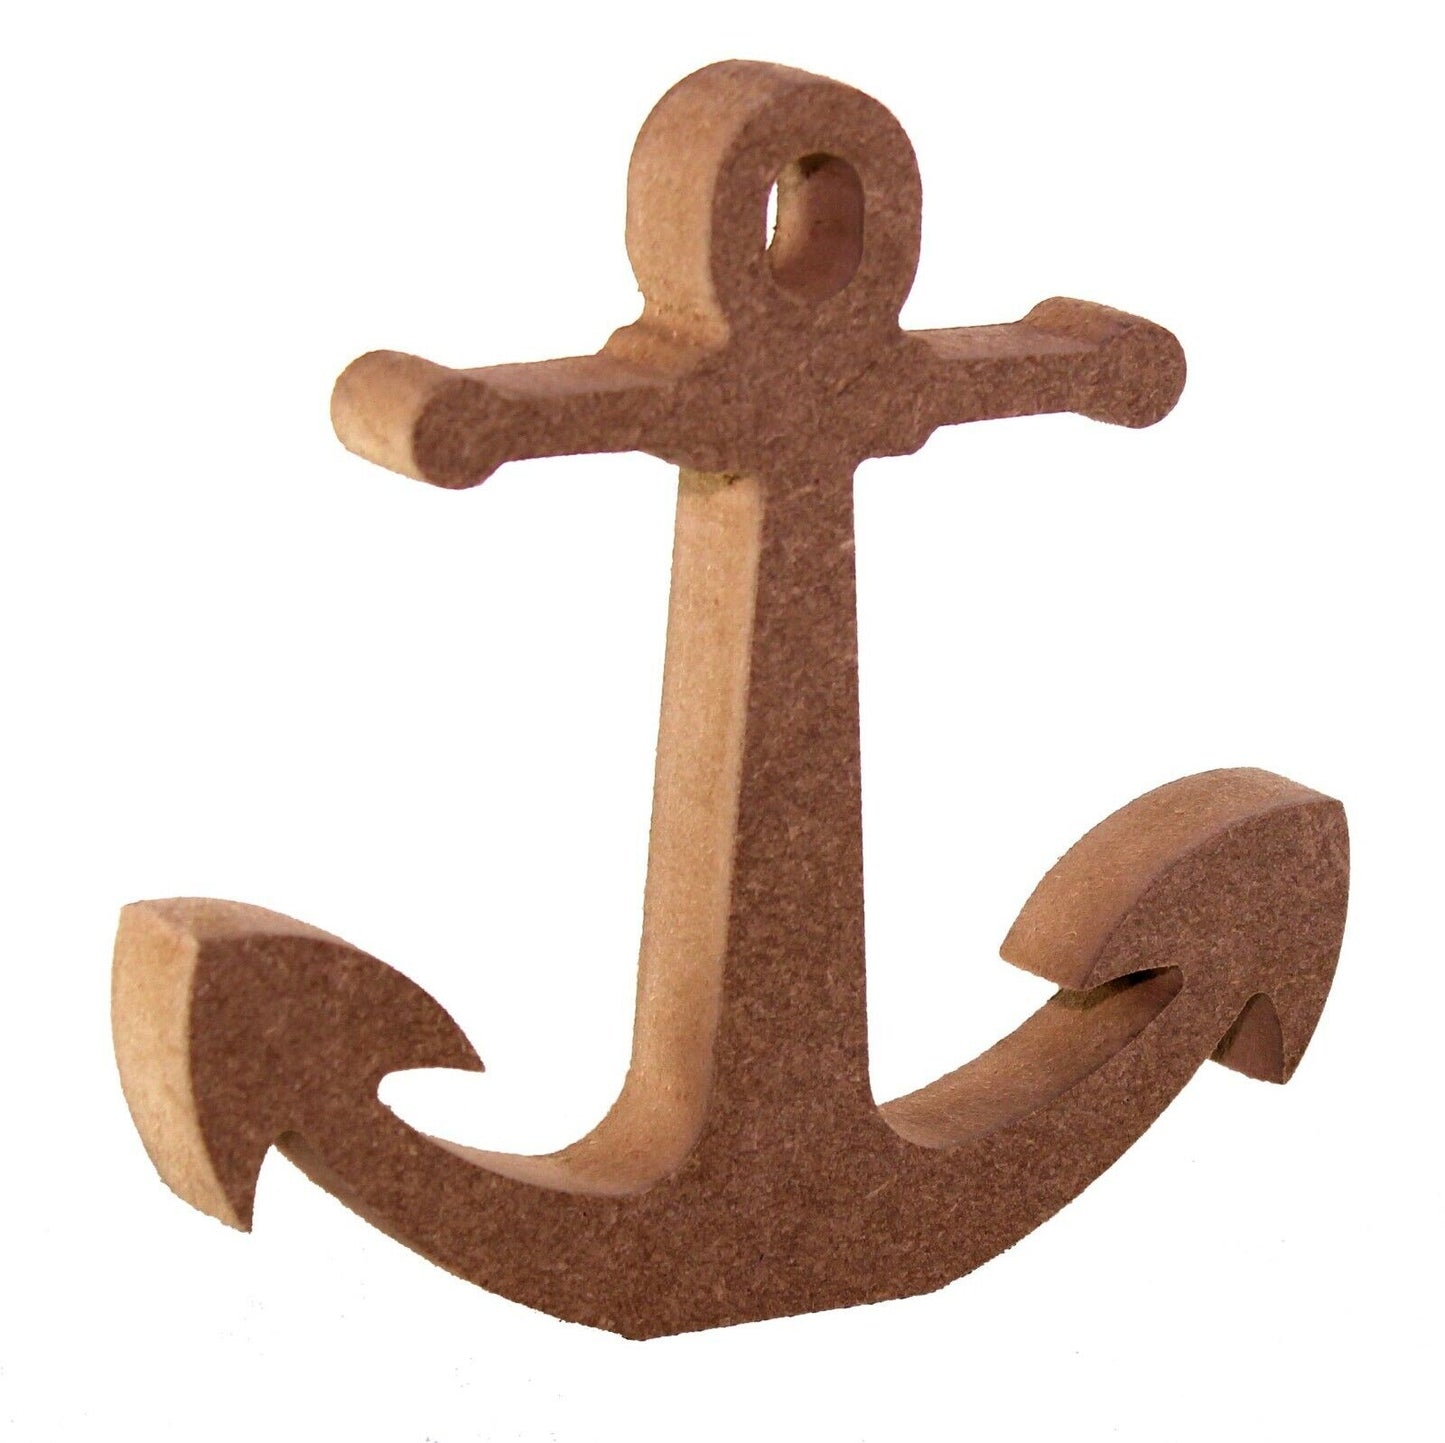 Free Standing 18mm MDF Anchor Craft Shape Various Sizes. Marine, Boat, Seaside